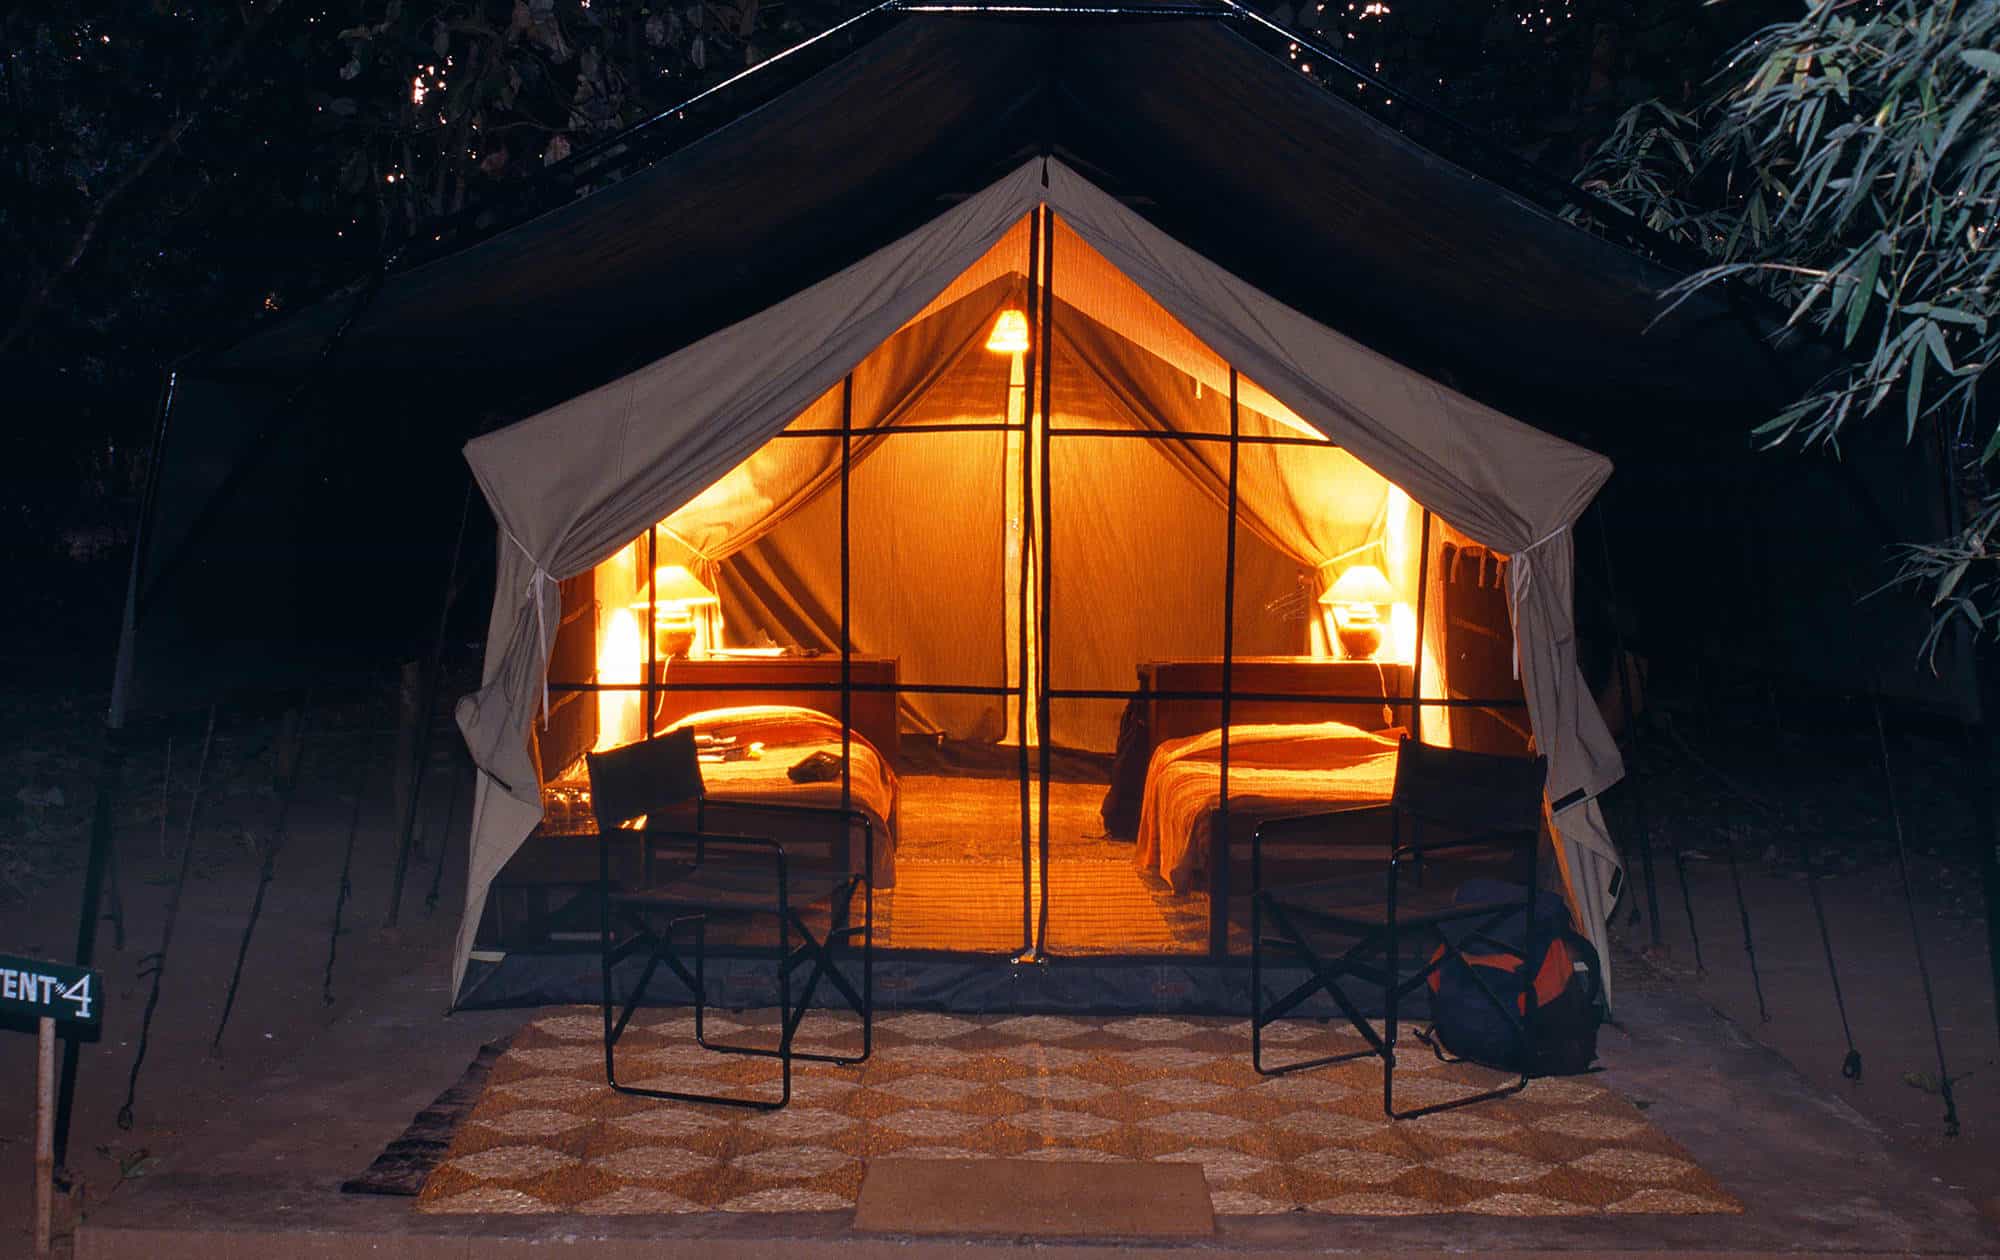 Glamorous Camping – Combines Glamour with Camping